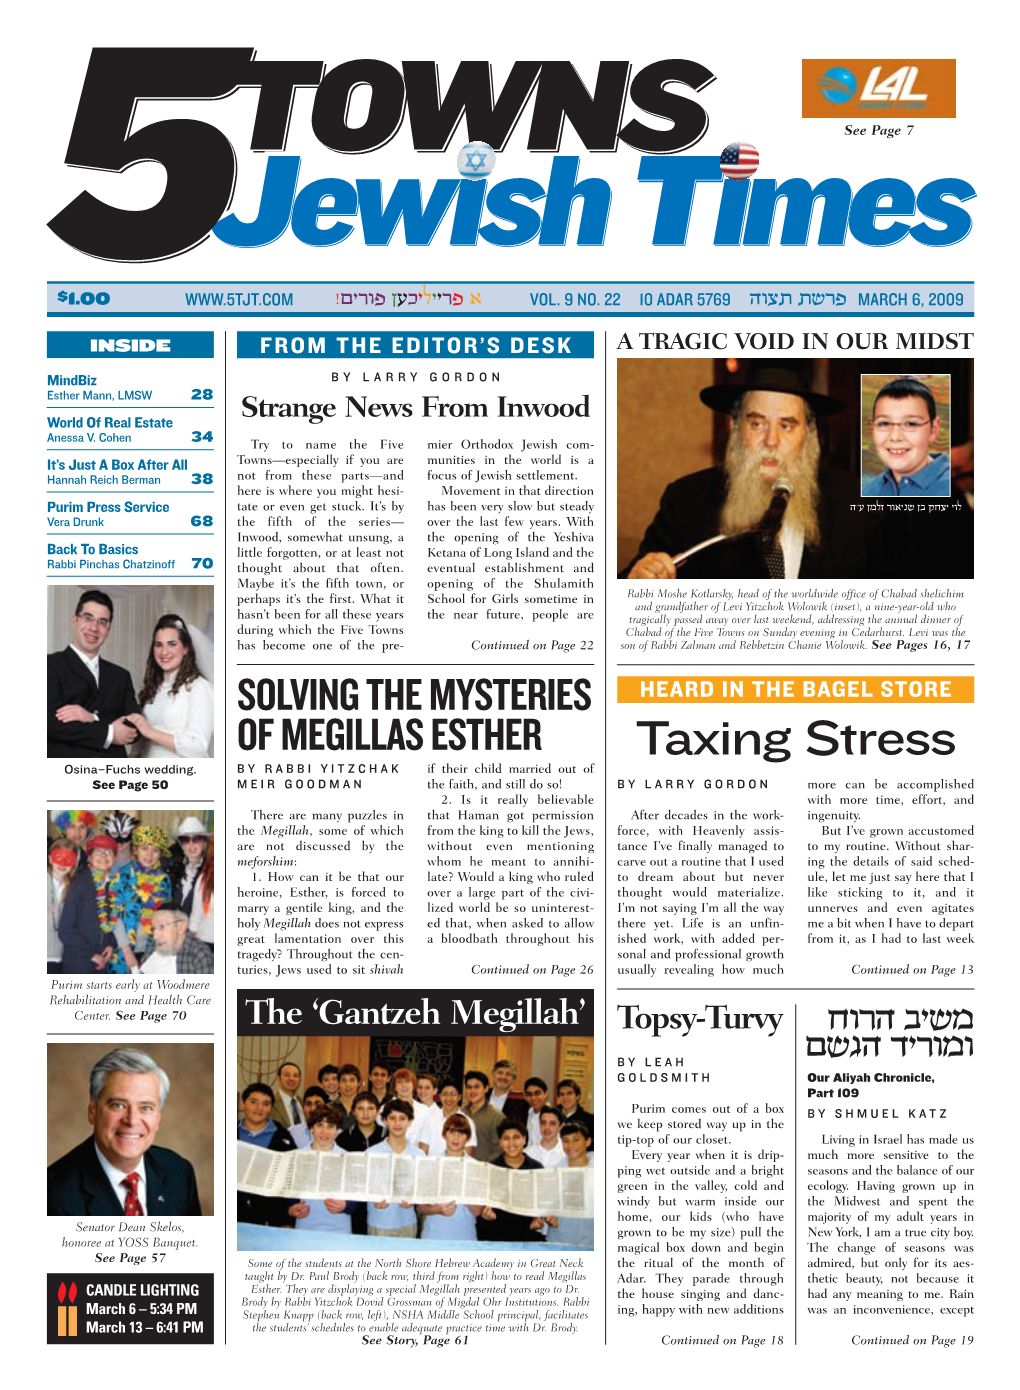 The 5 Towns Jewish Times Online @